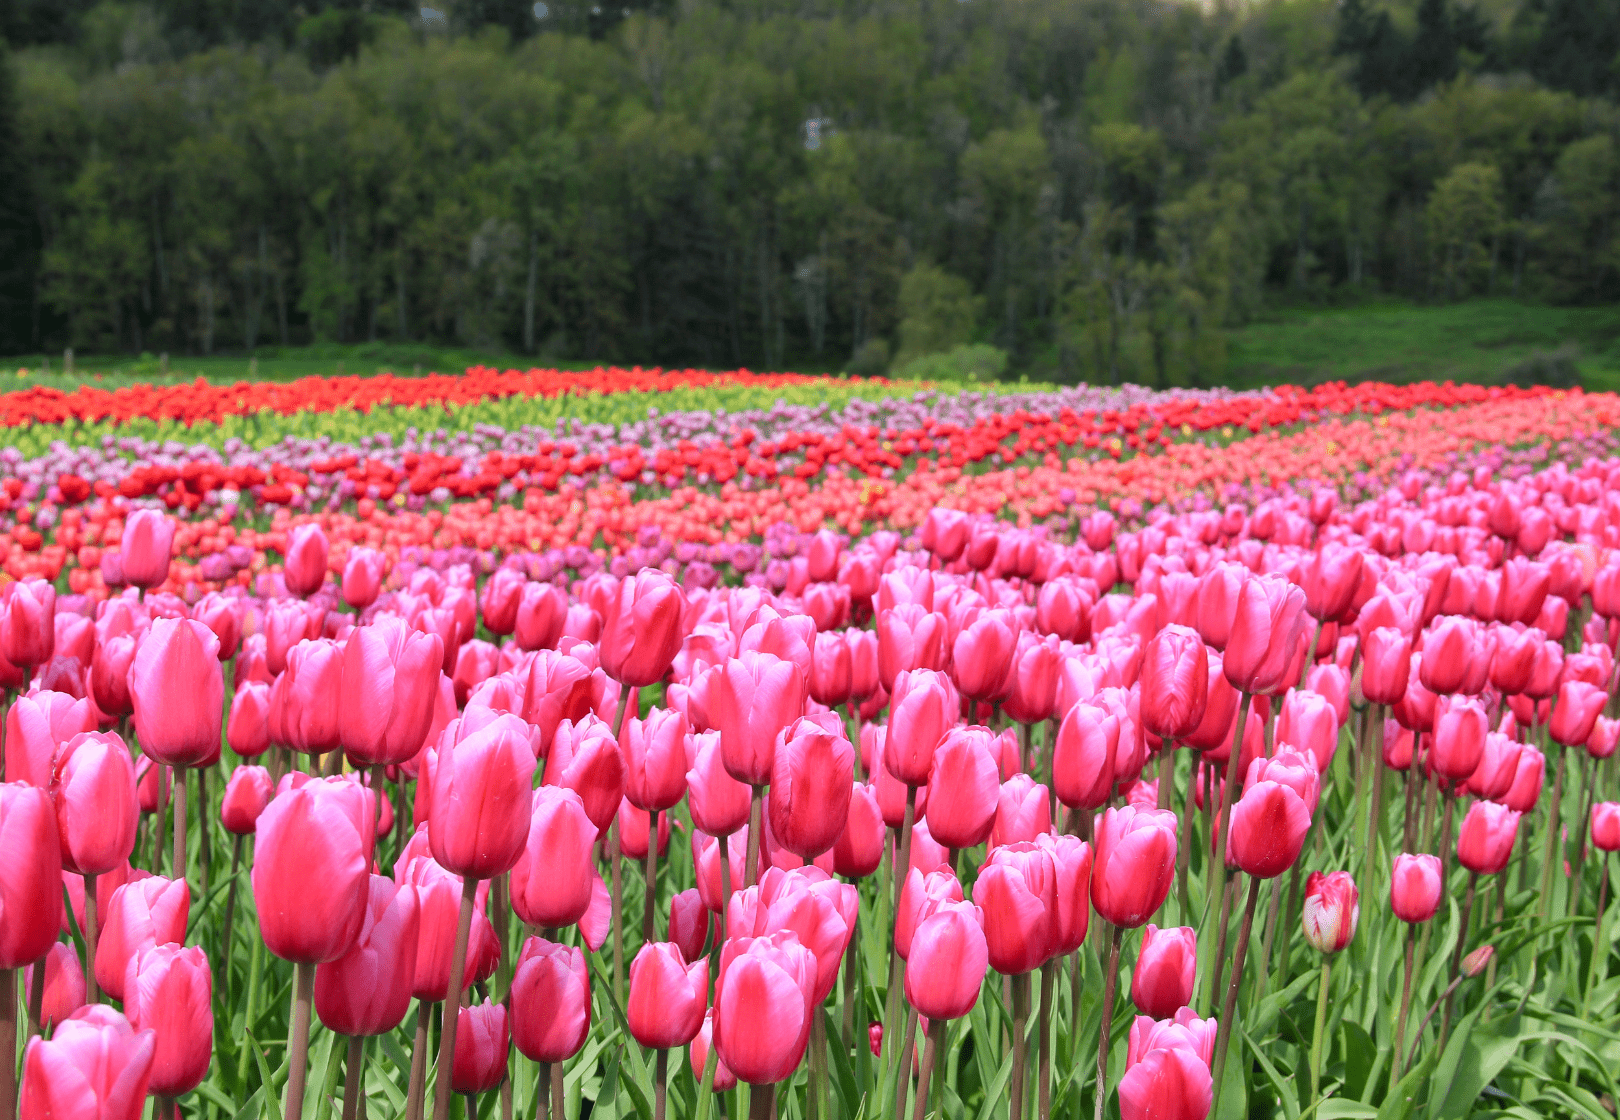 Tulips in a field in the Fraser Valley